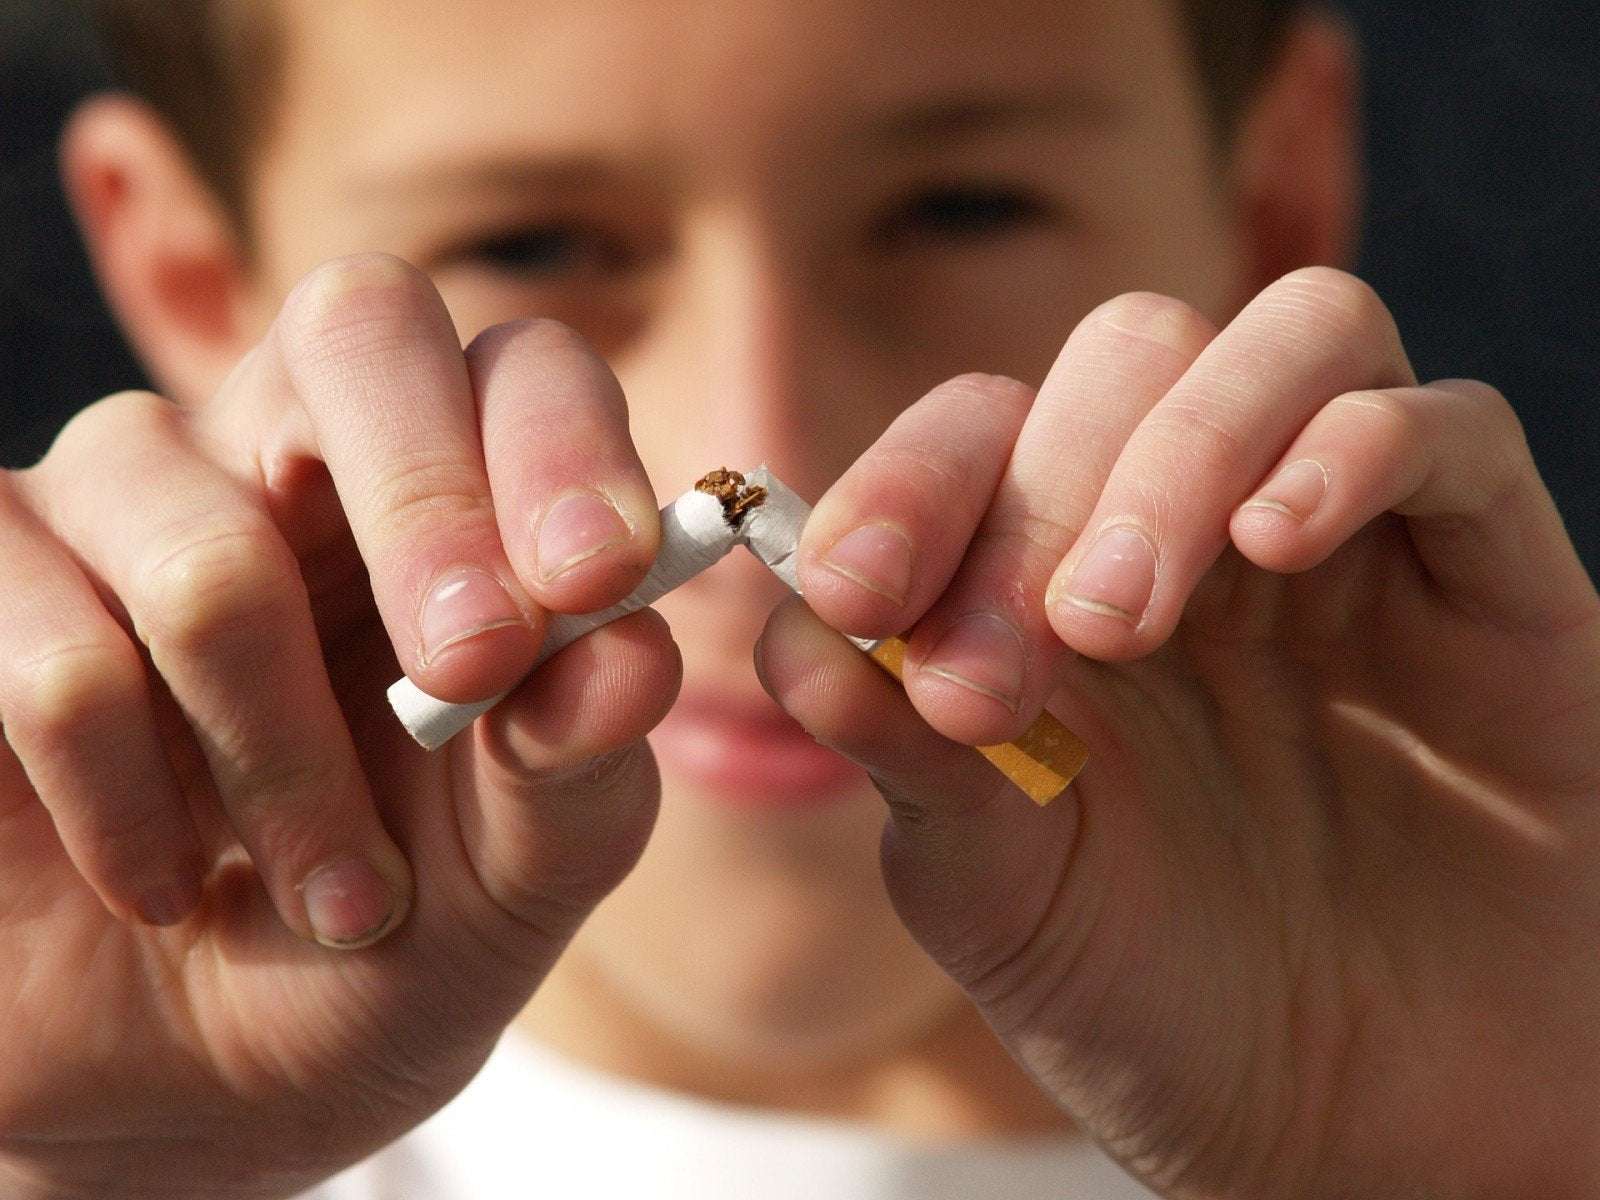 image for Smokers good at math are more likely to want to quit